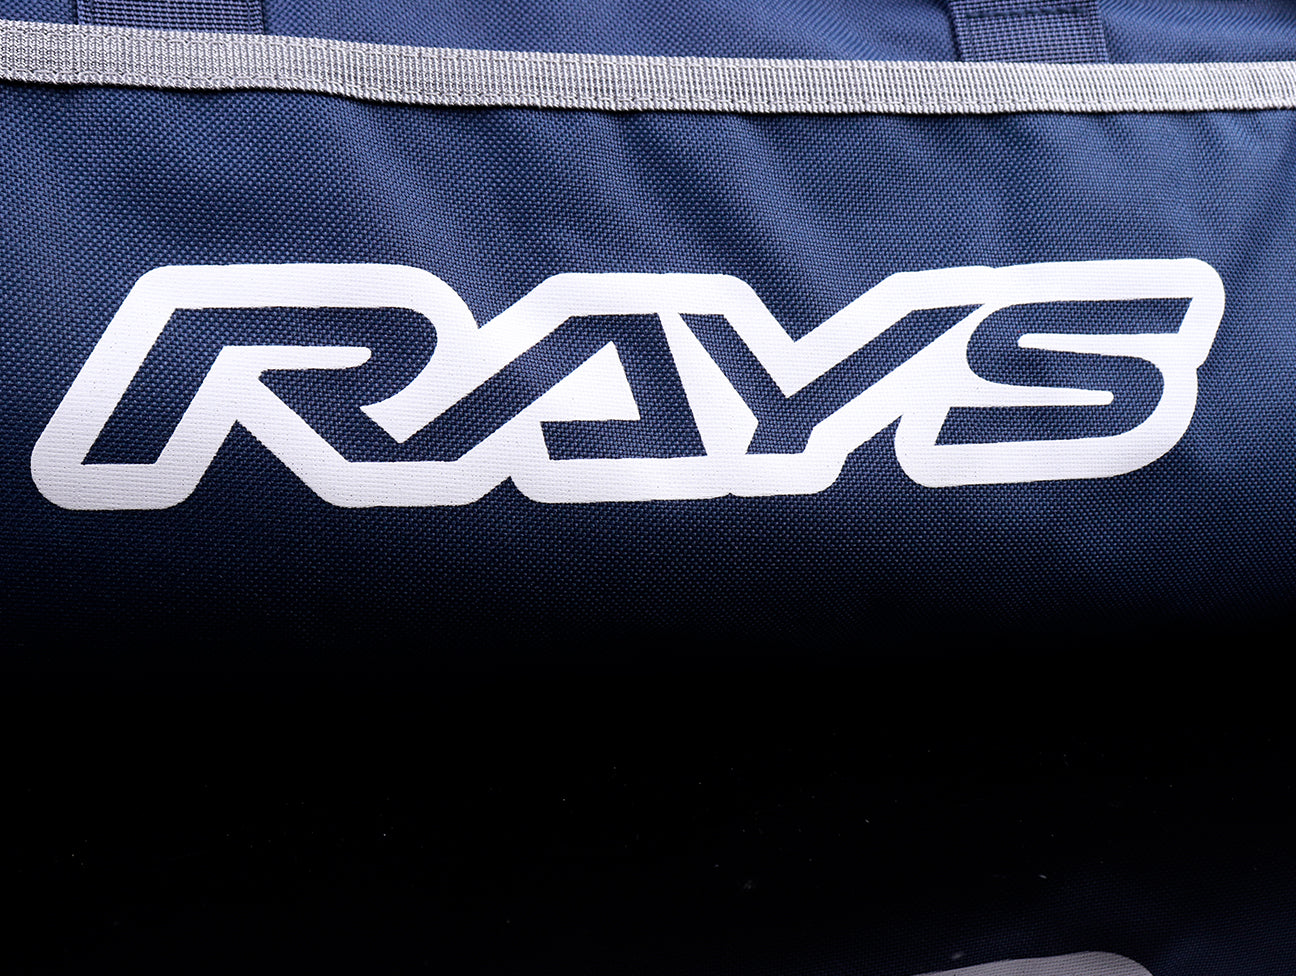 RAYS Official Tool Bag - Navy